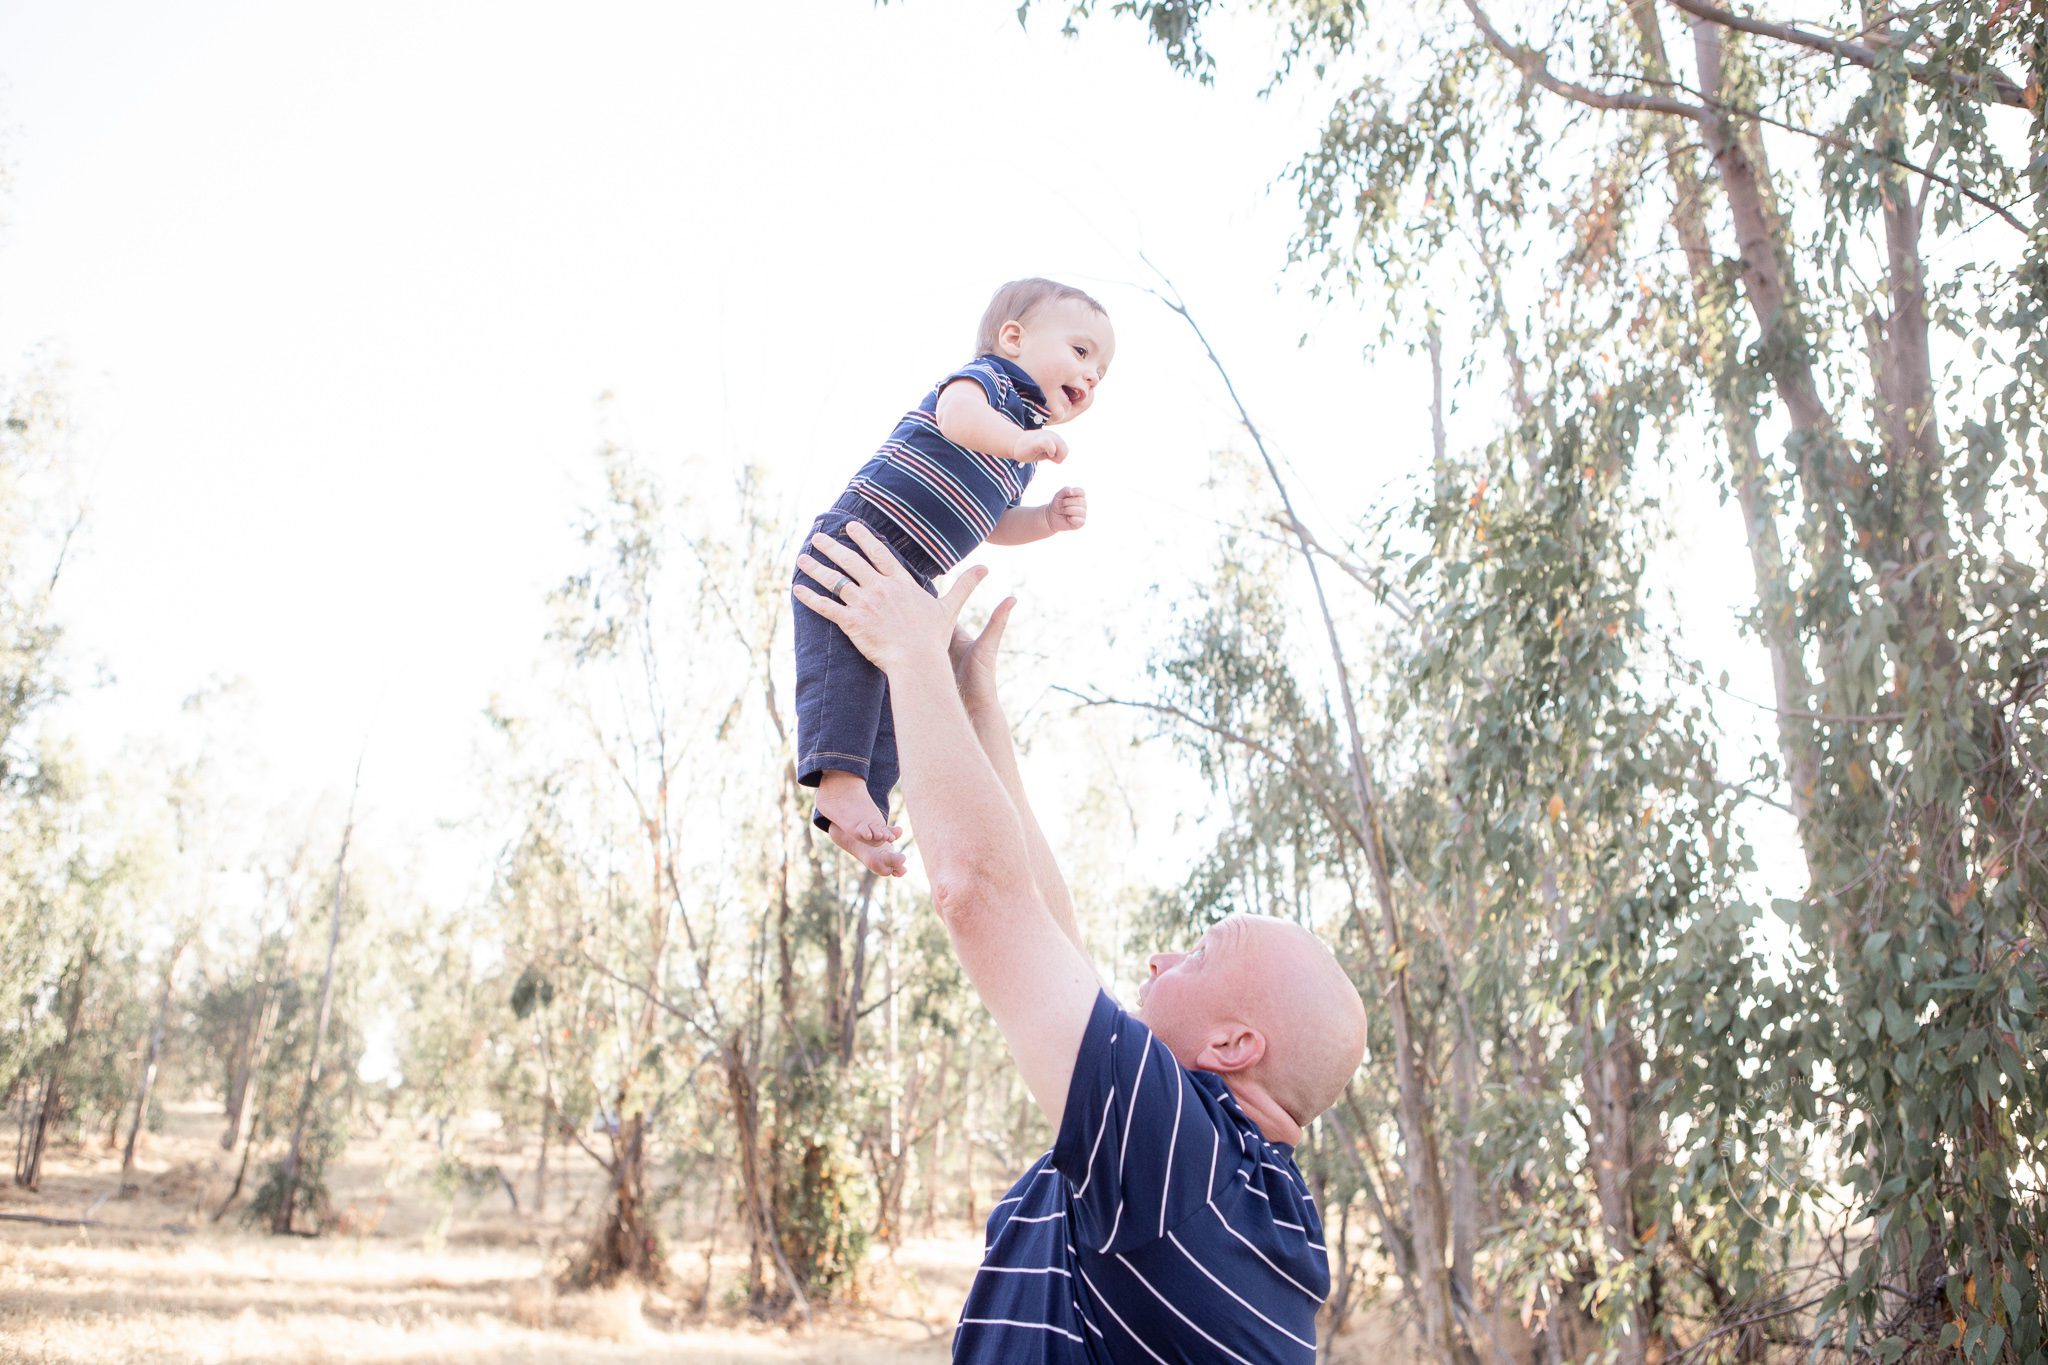 Family pictures in a field, dad throwing baby in the air smiling, One Good Shot Photography